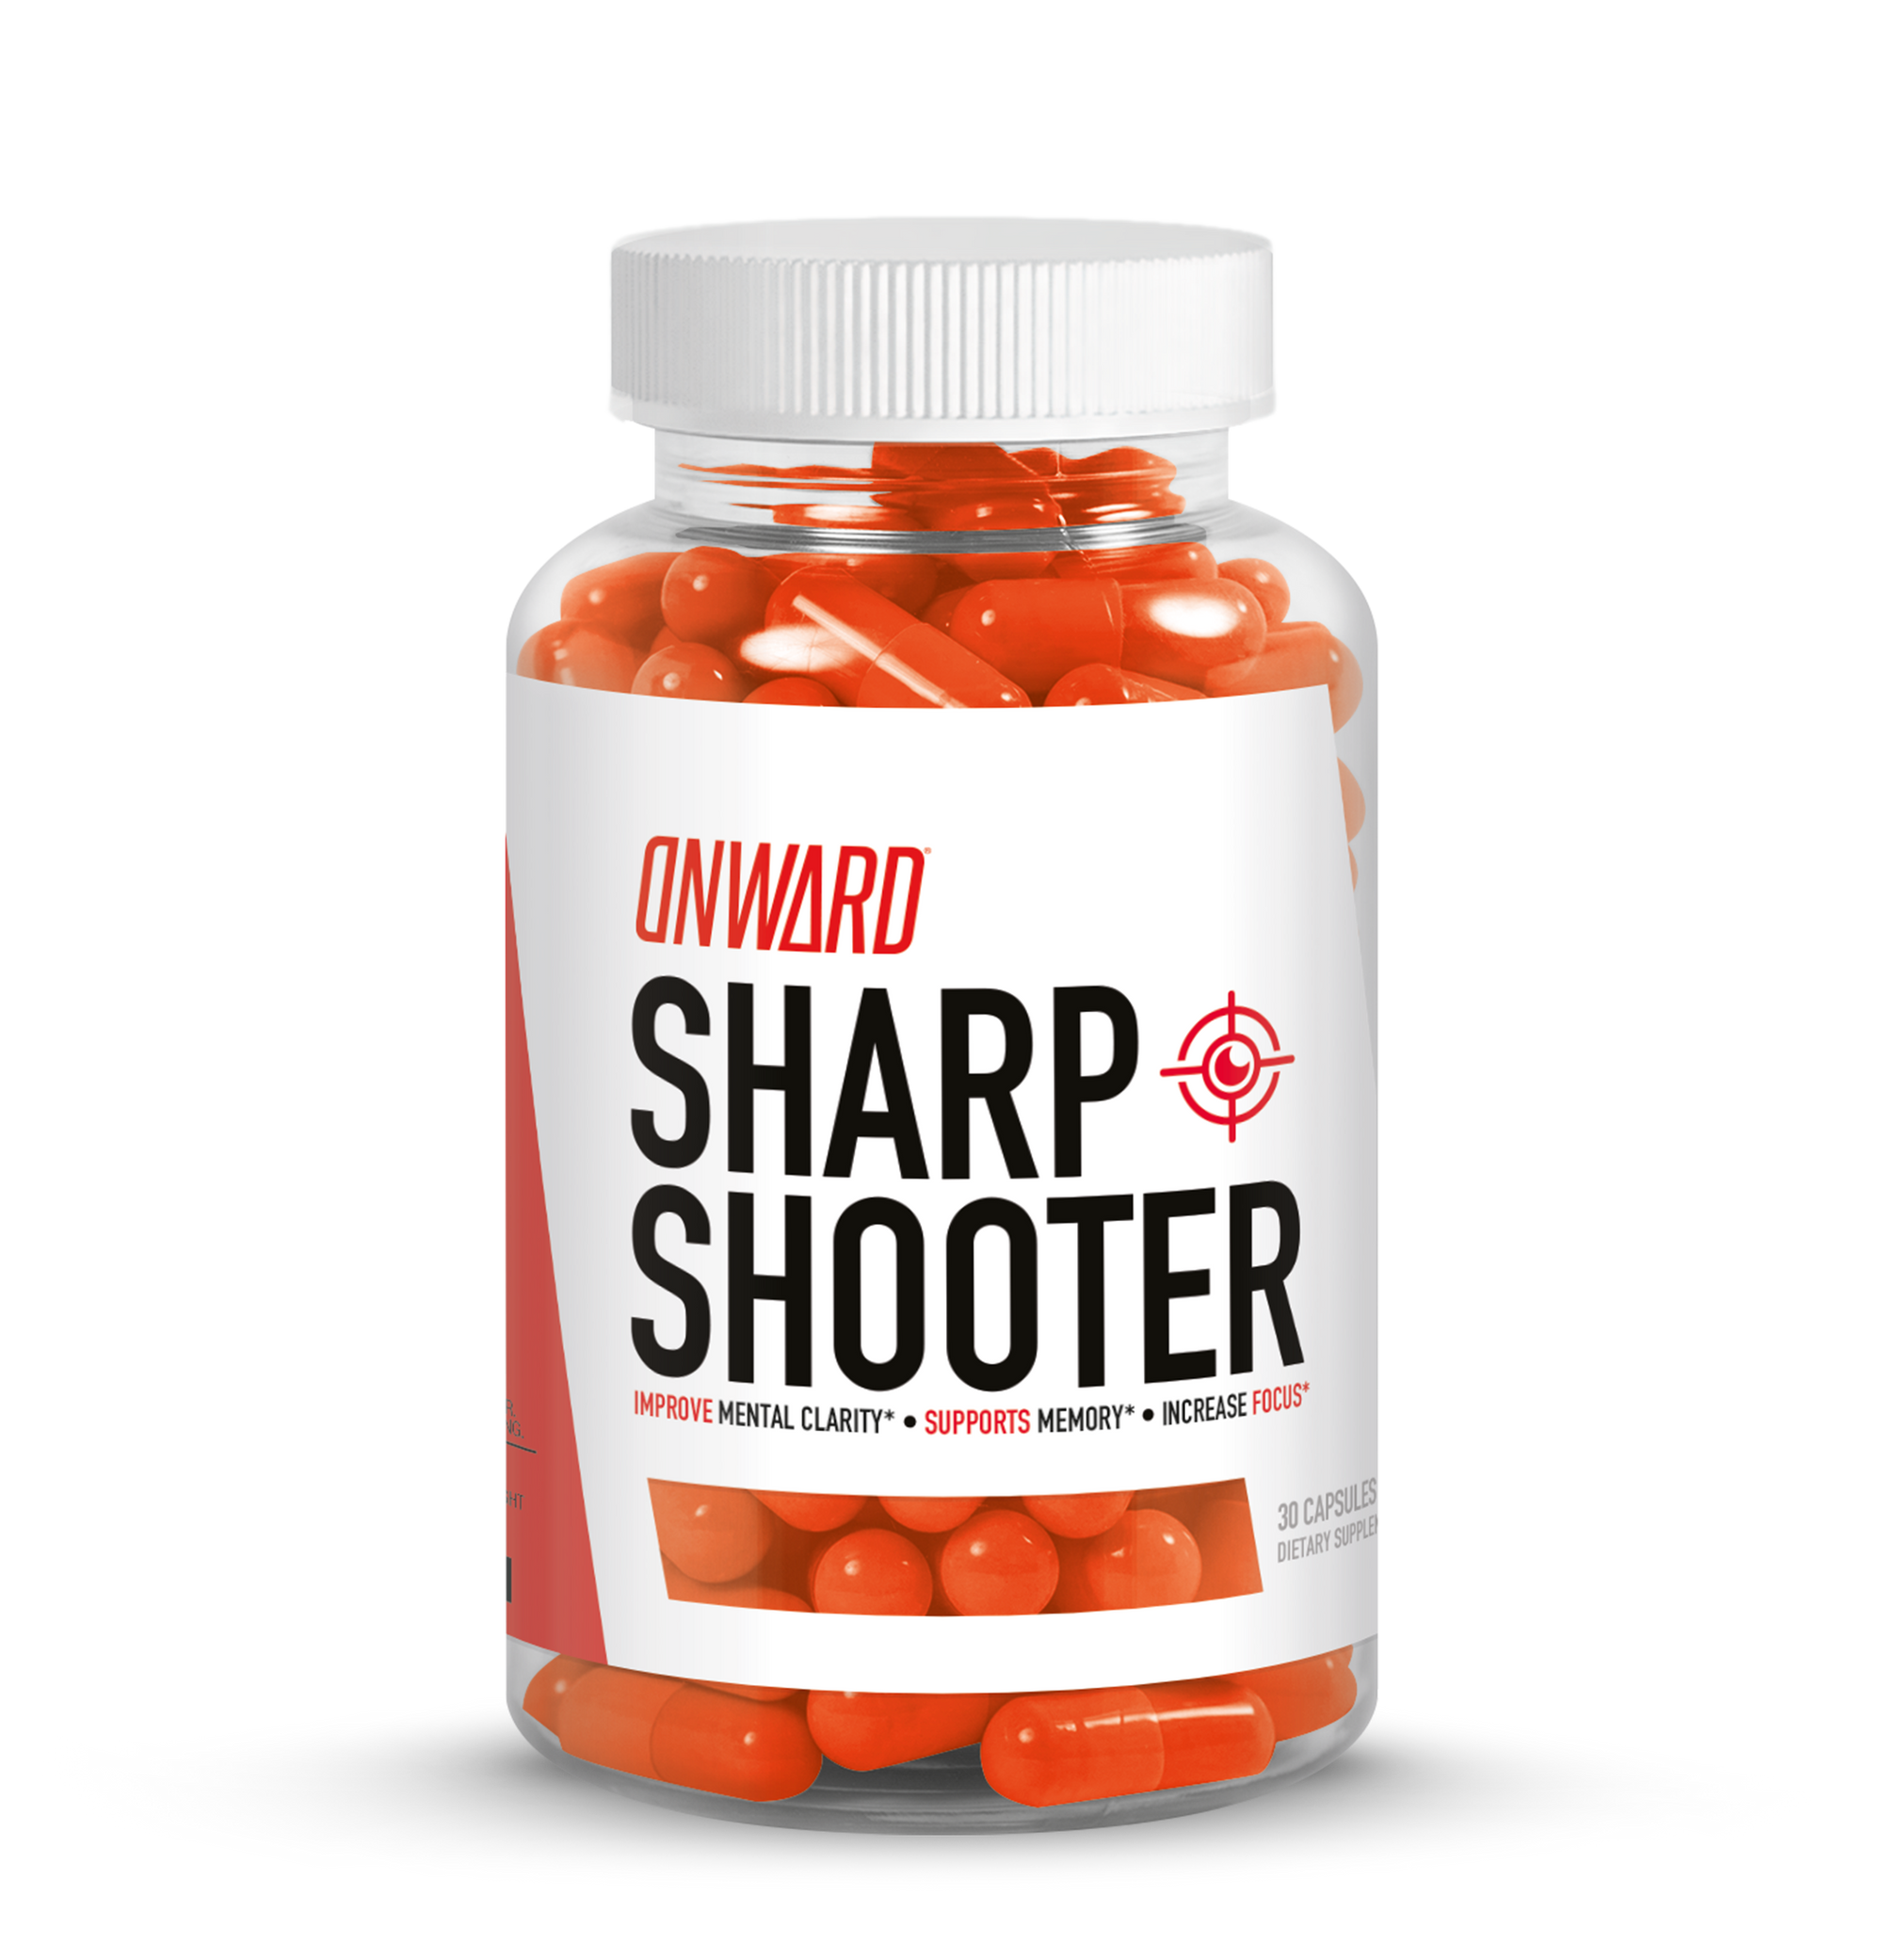 Clear bottle with orange capsules inside. The label shows "Sharp Shooter" and a target with a moon in the center.